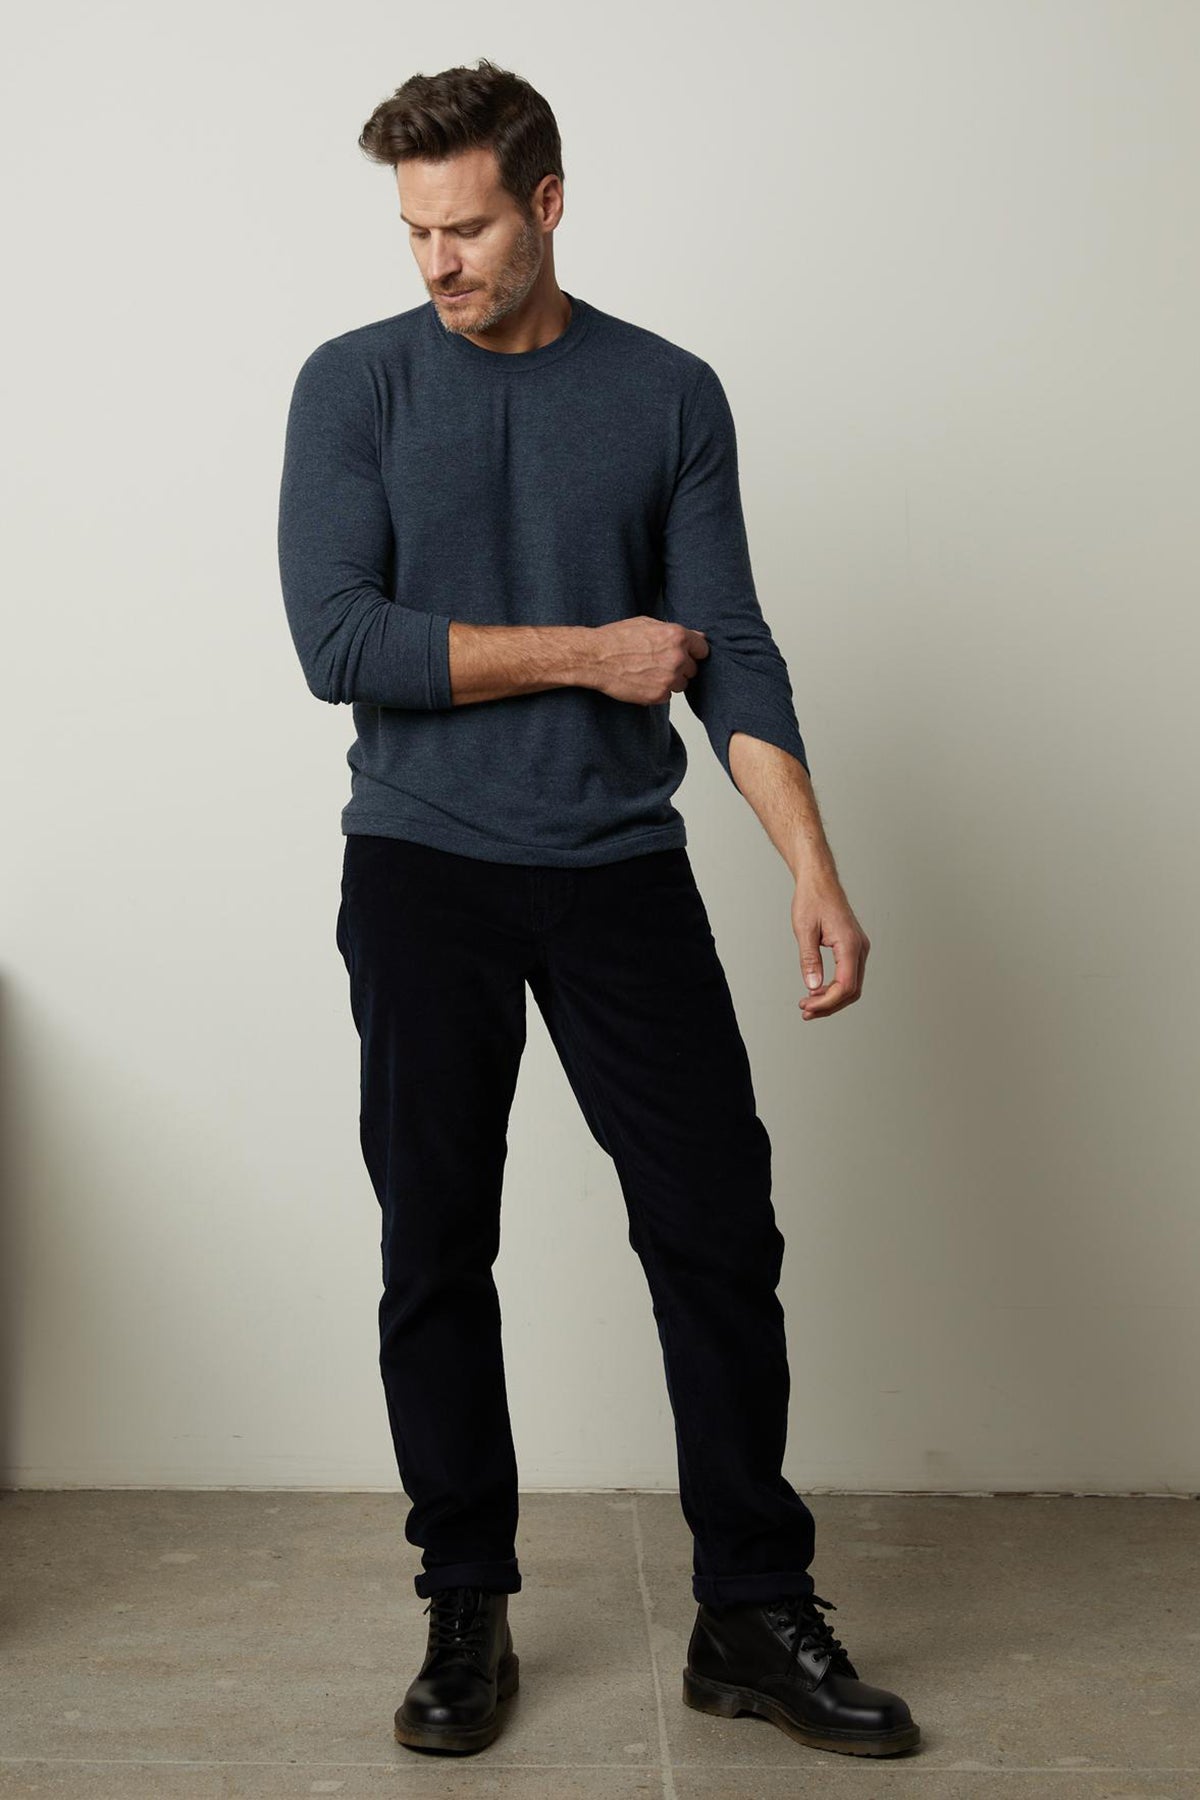   A man wearing the Velvet by Graham & Spencer BECKER COZY JERSEY CREW blue sweater and black pants. 